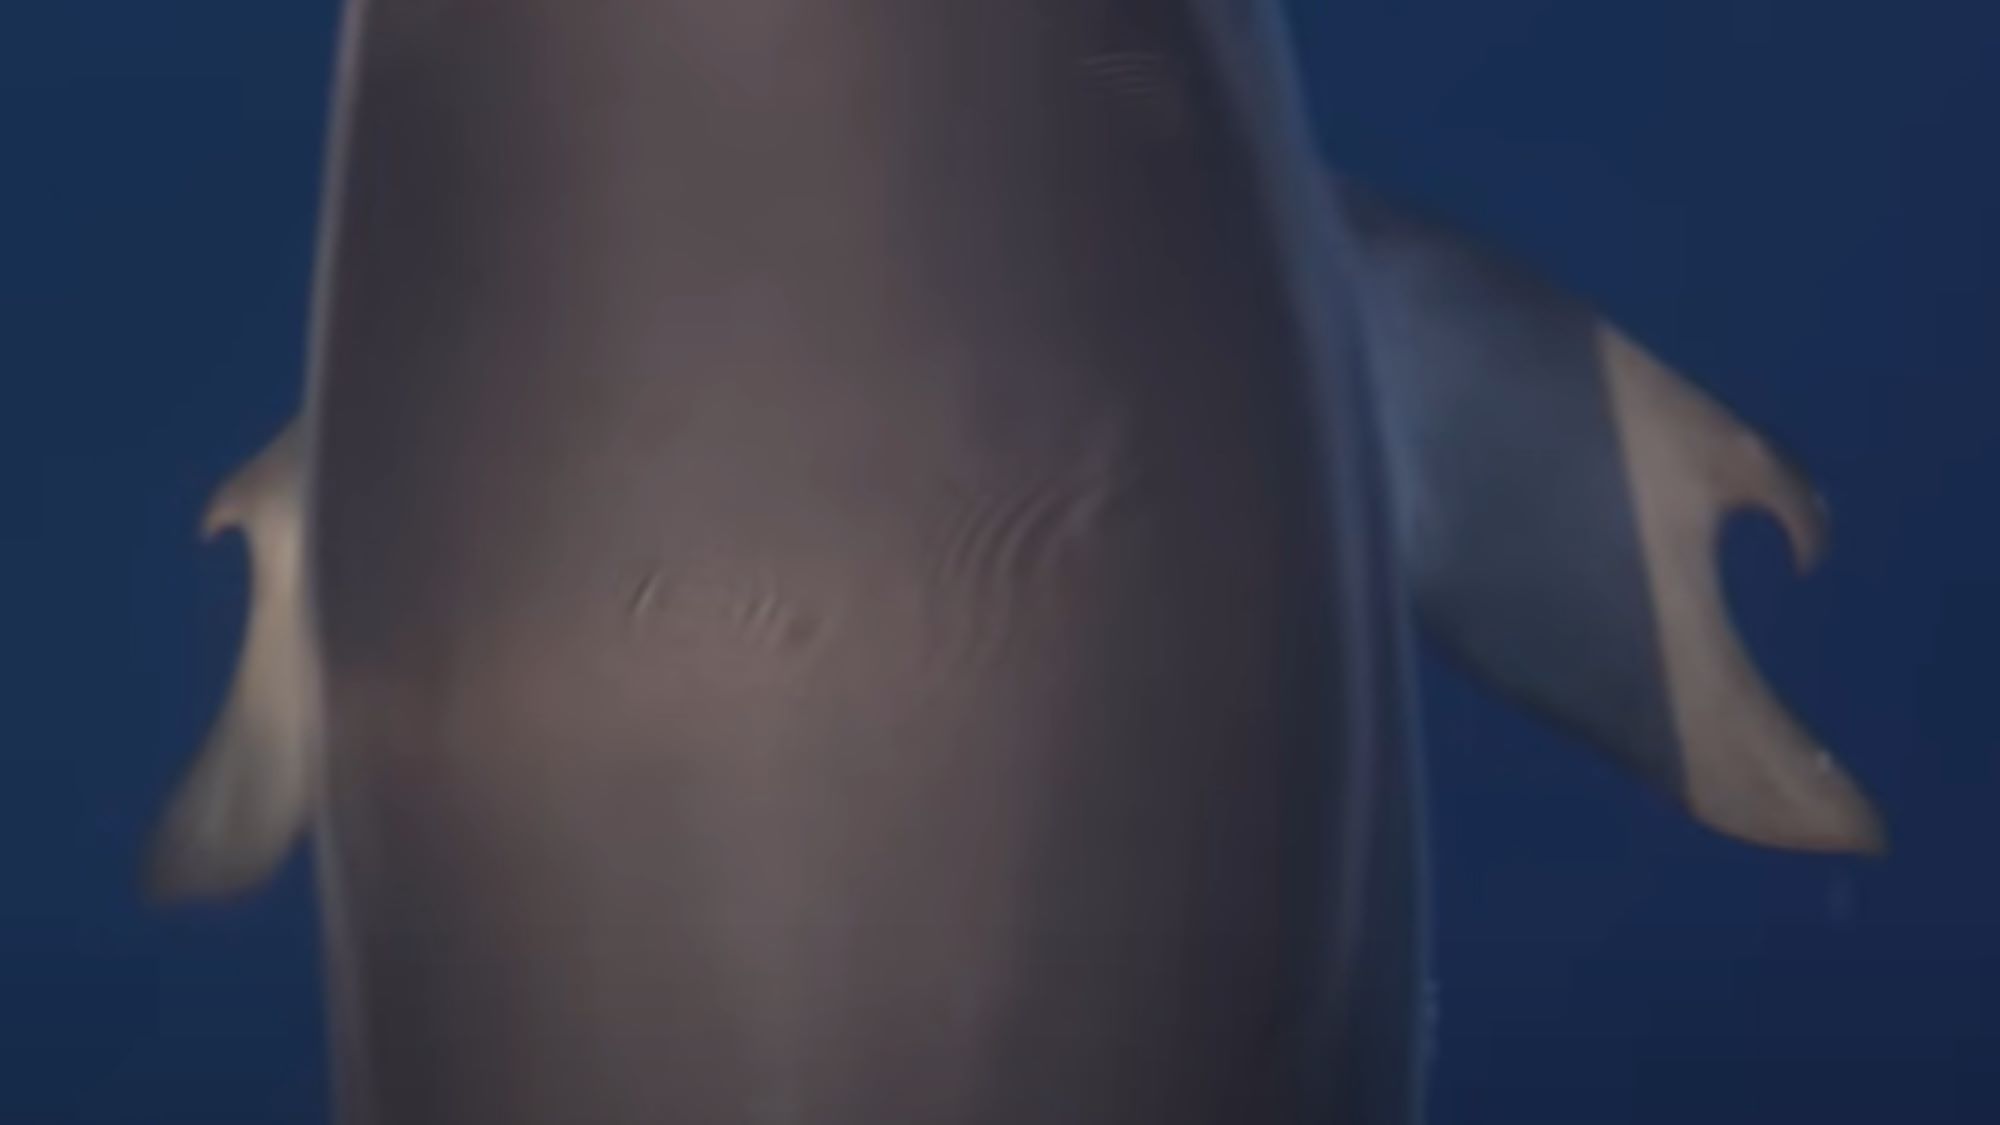 A close up picture of the dolphin's flippers with carved out "thumbs."